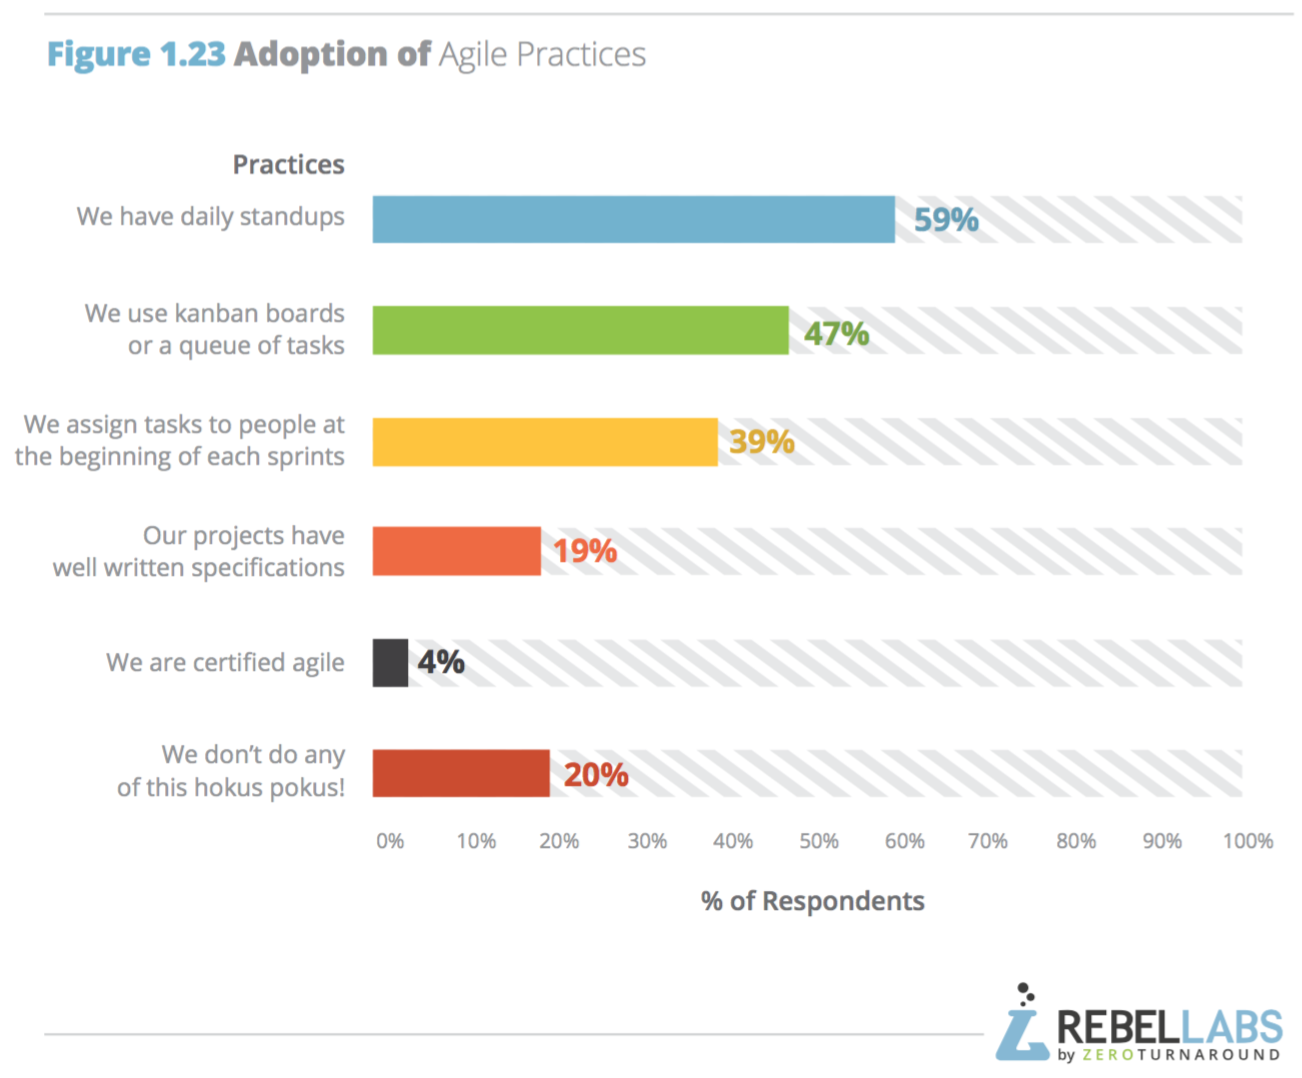 bar chart showing adoption of various agile practices